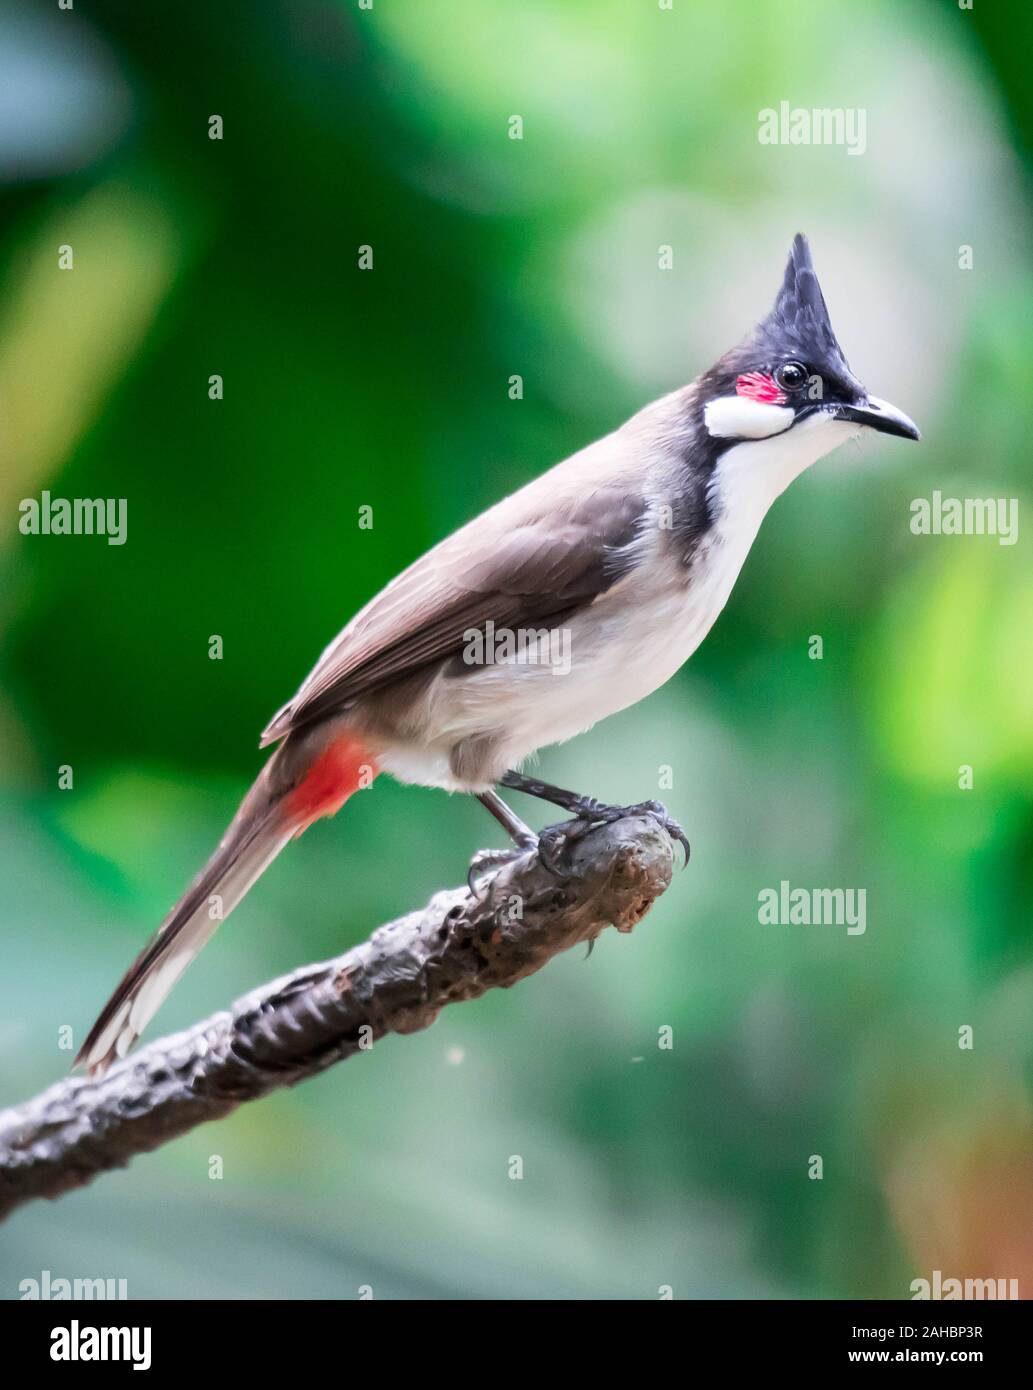 A Red-whiskered Bulbul bird is a passerine bird found in Asia ...